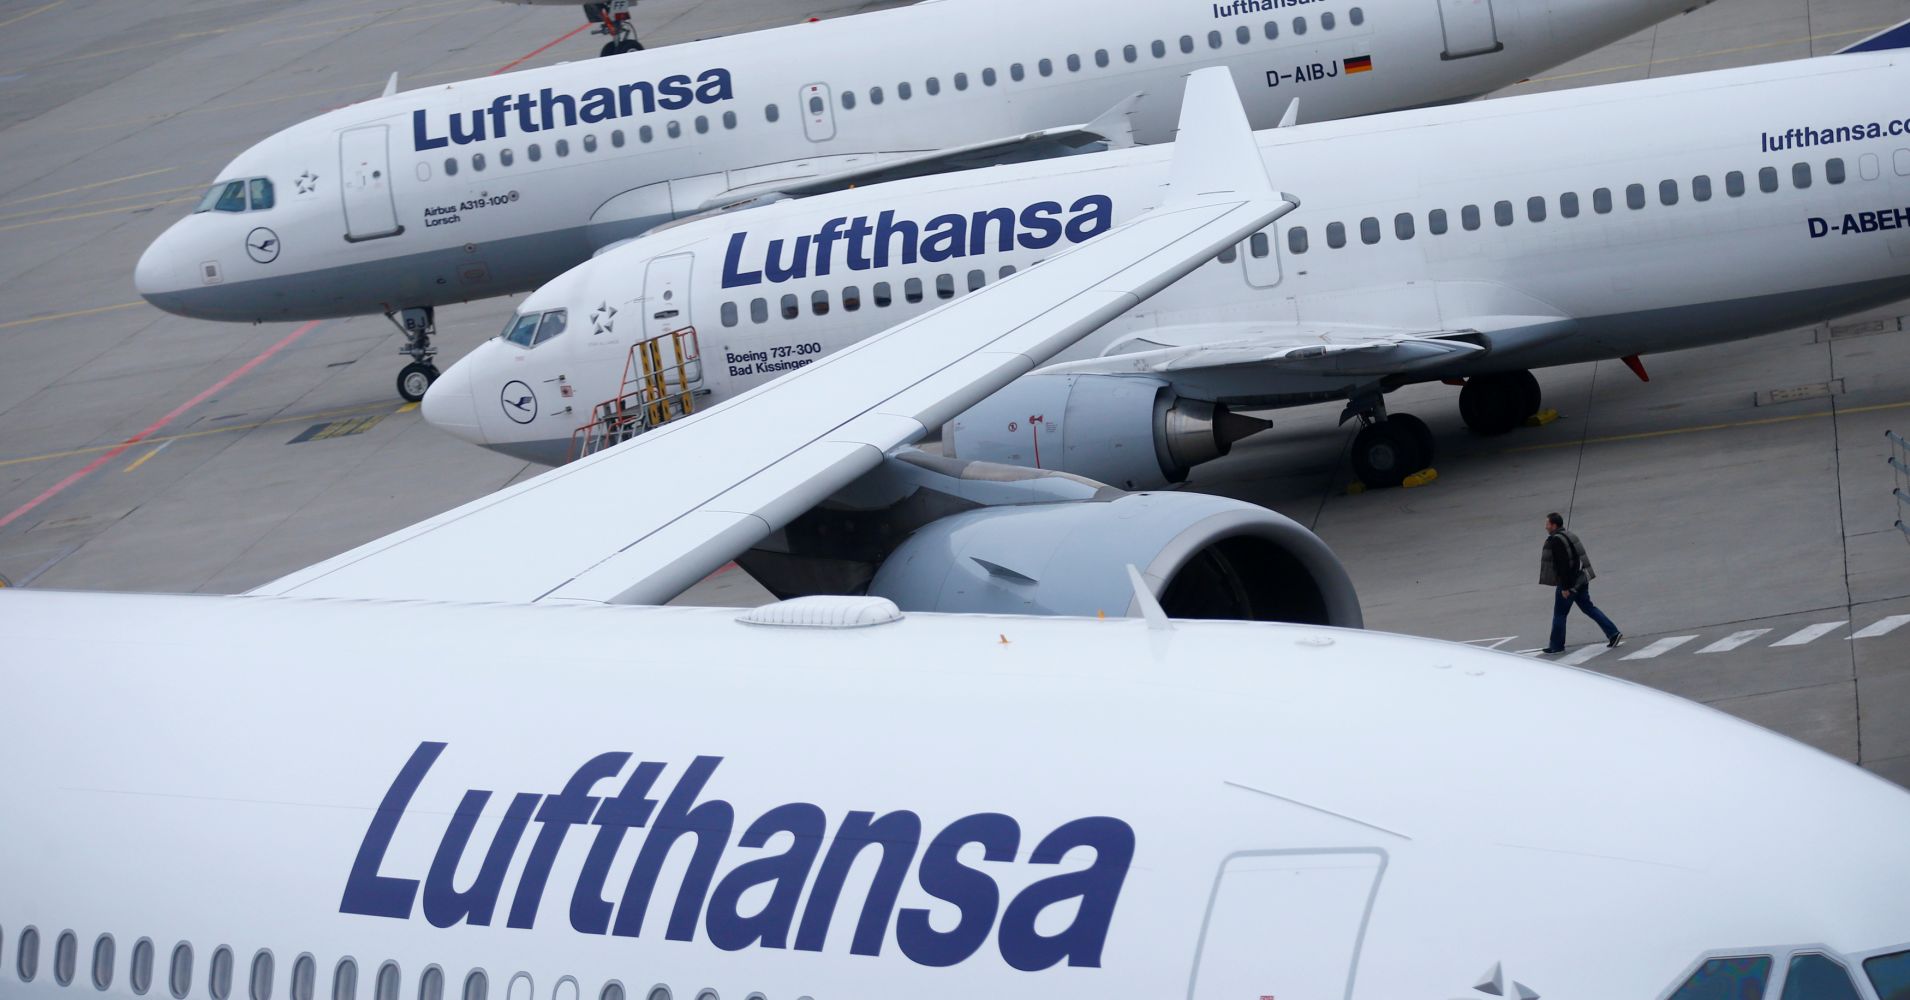 Lufthansa airplanes are parked on the tarmac at Frankfurt airport, Germany.